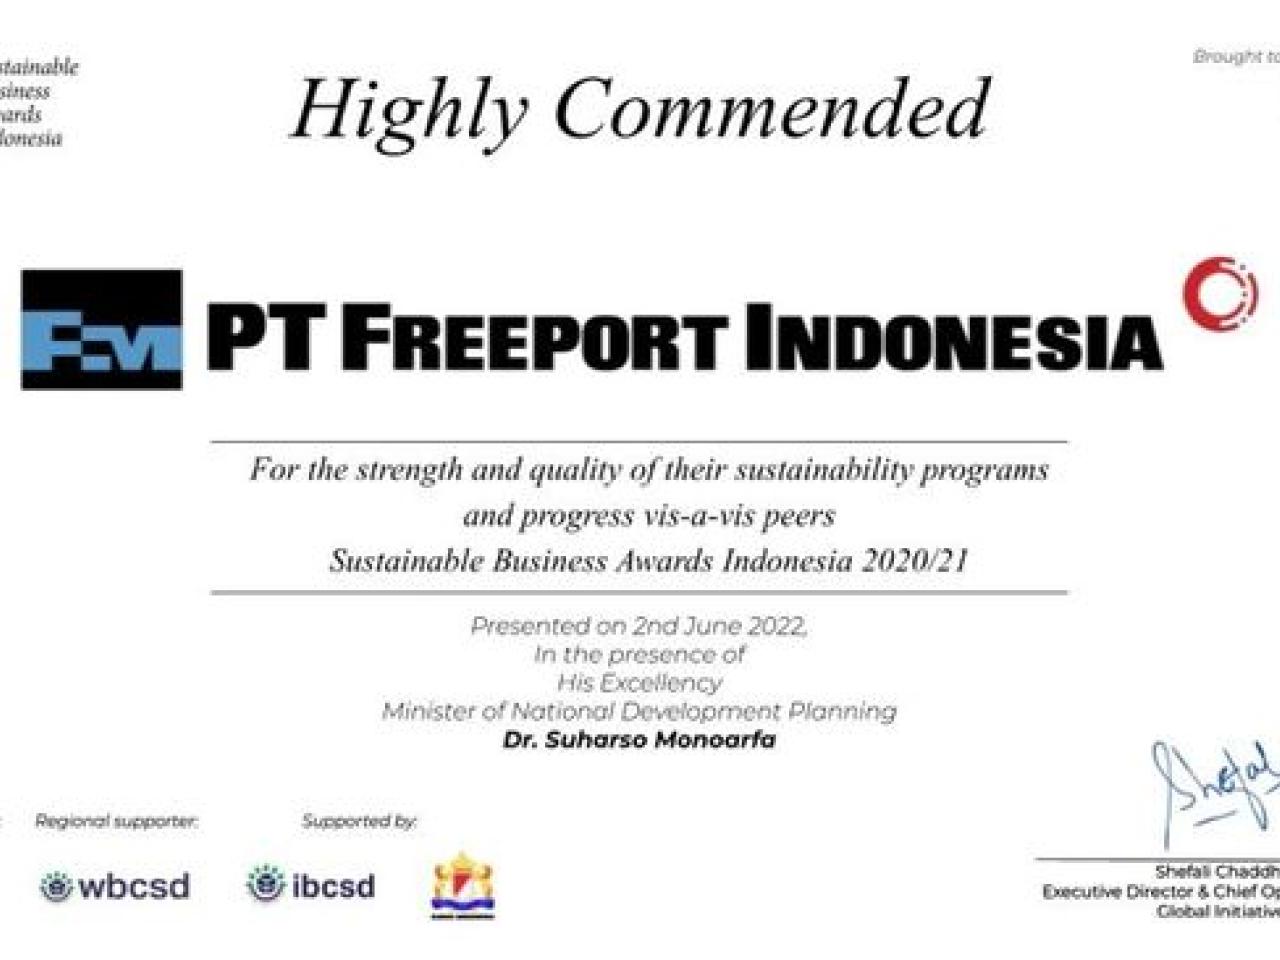 PT Freeport Indonesia's Sustainable Business Practices Award in the Highly Commended Category